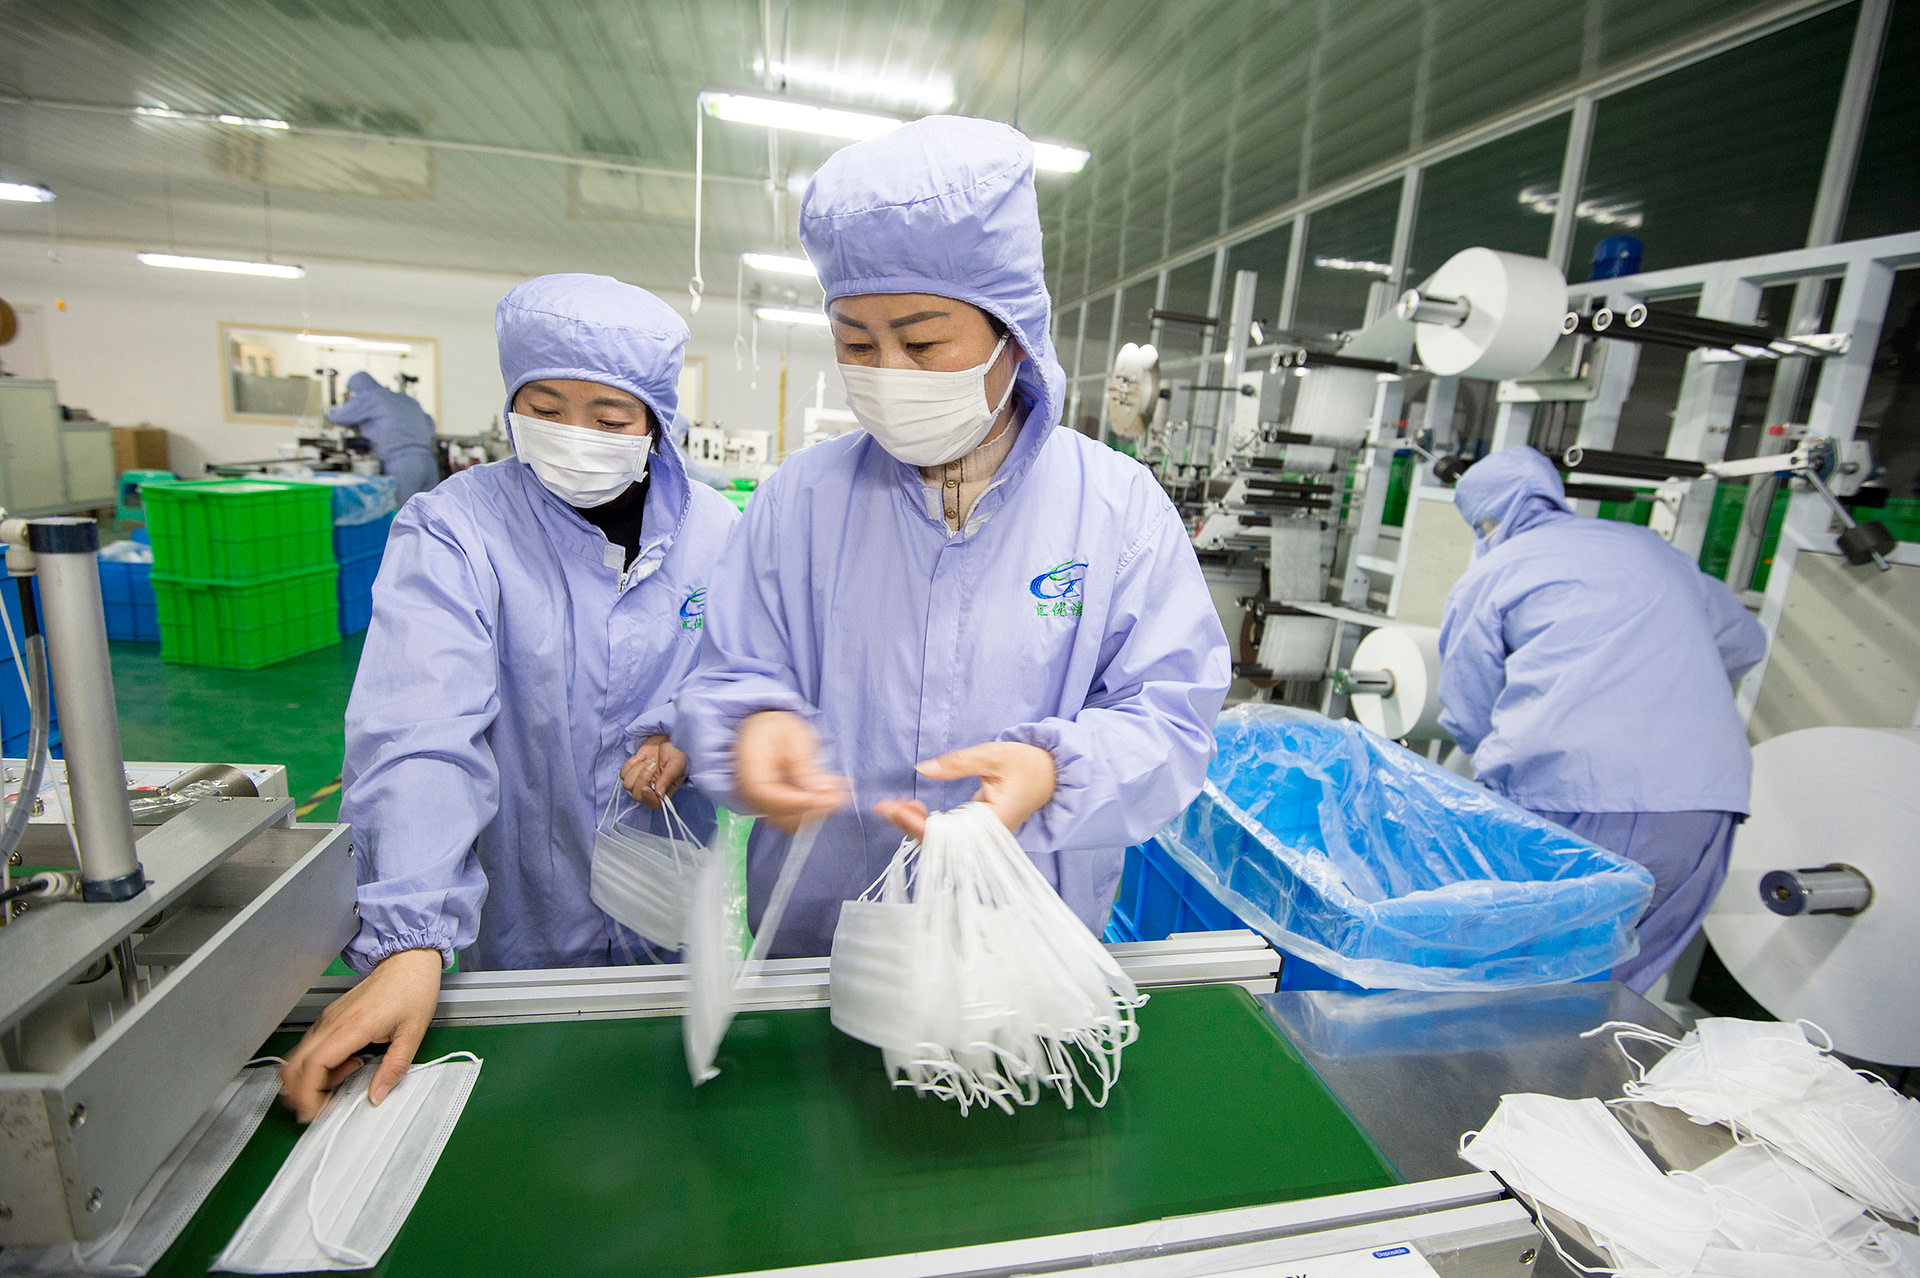 China’s Covid wave threatens another snarl of U.S. medical supply chain